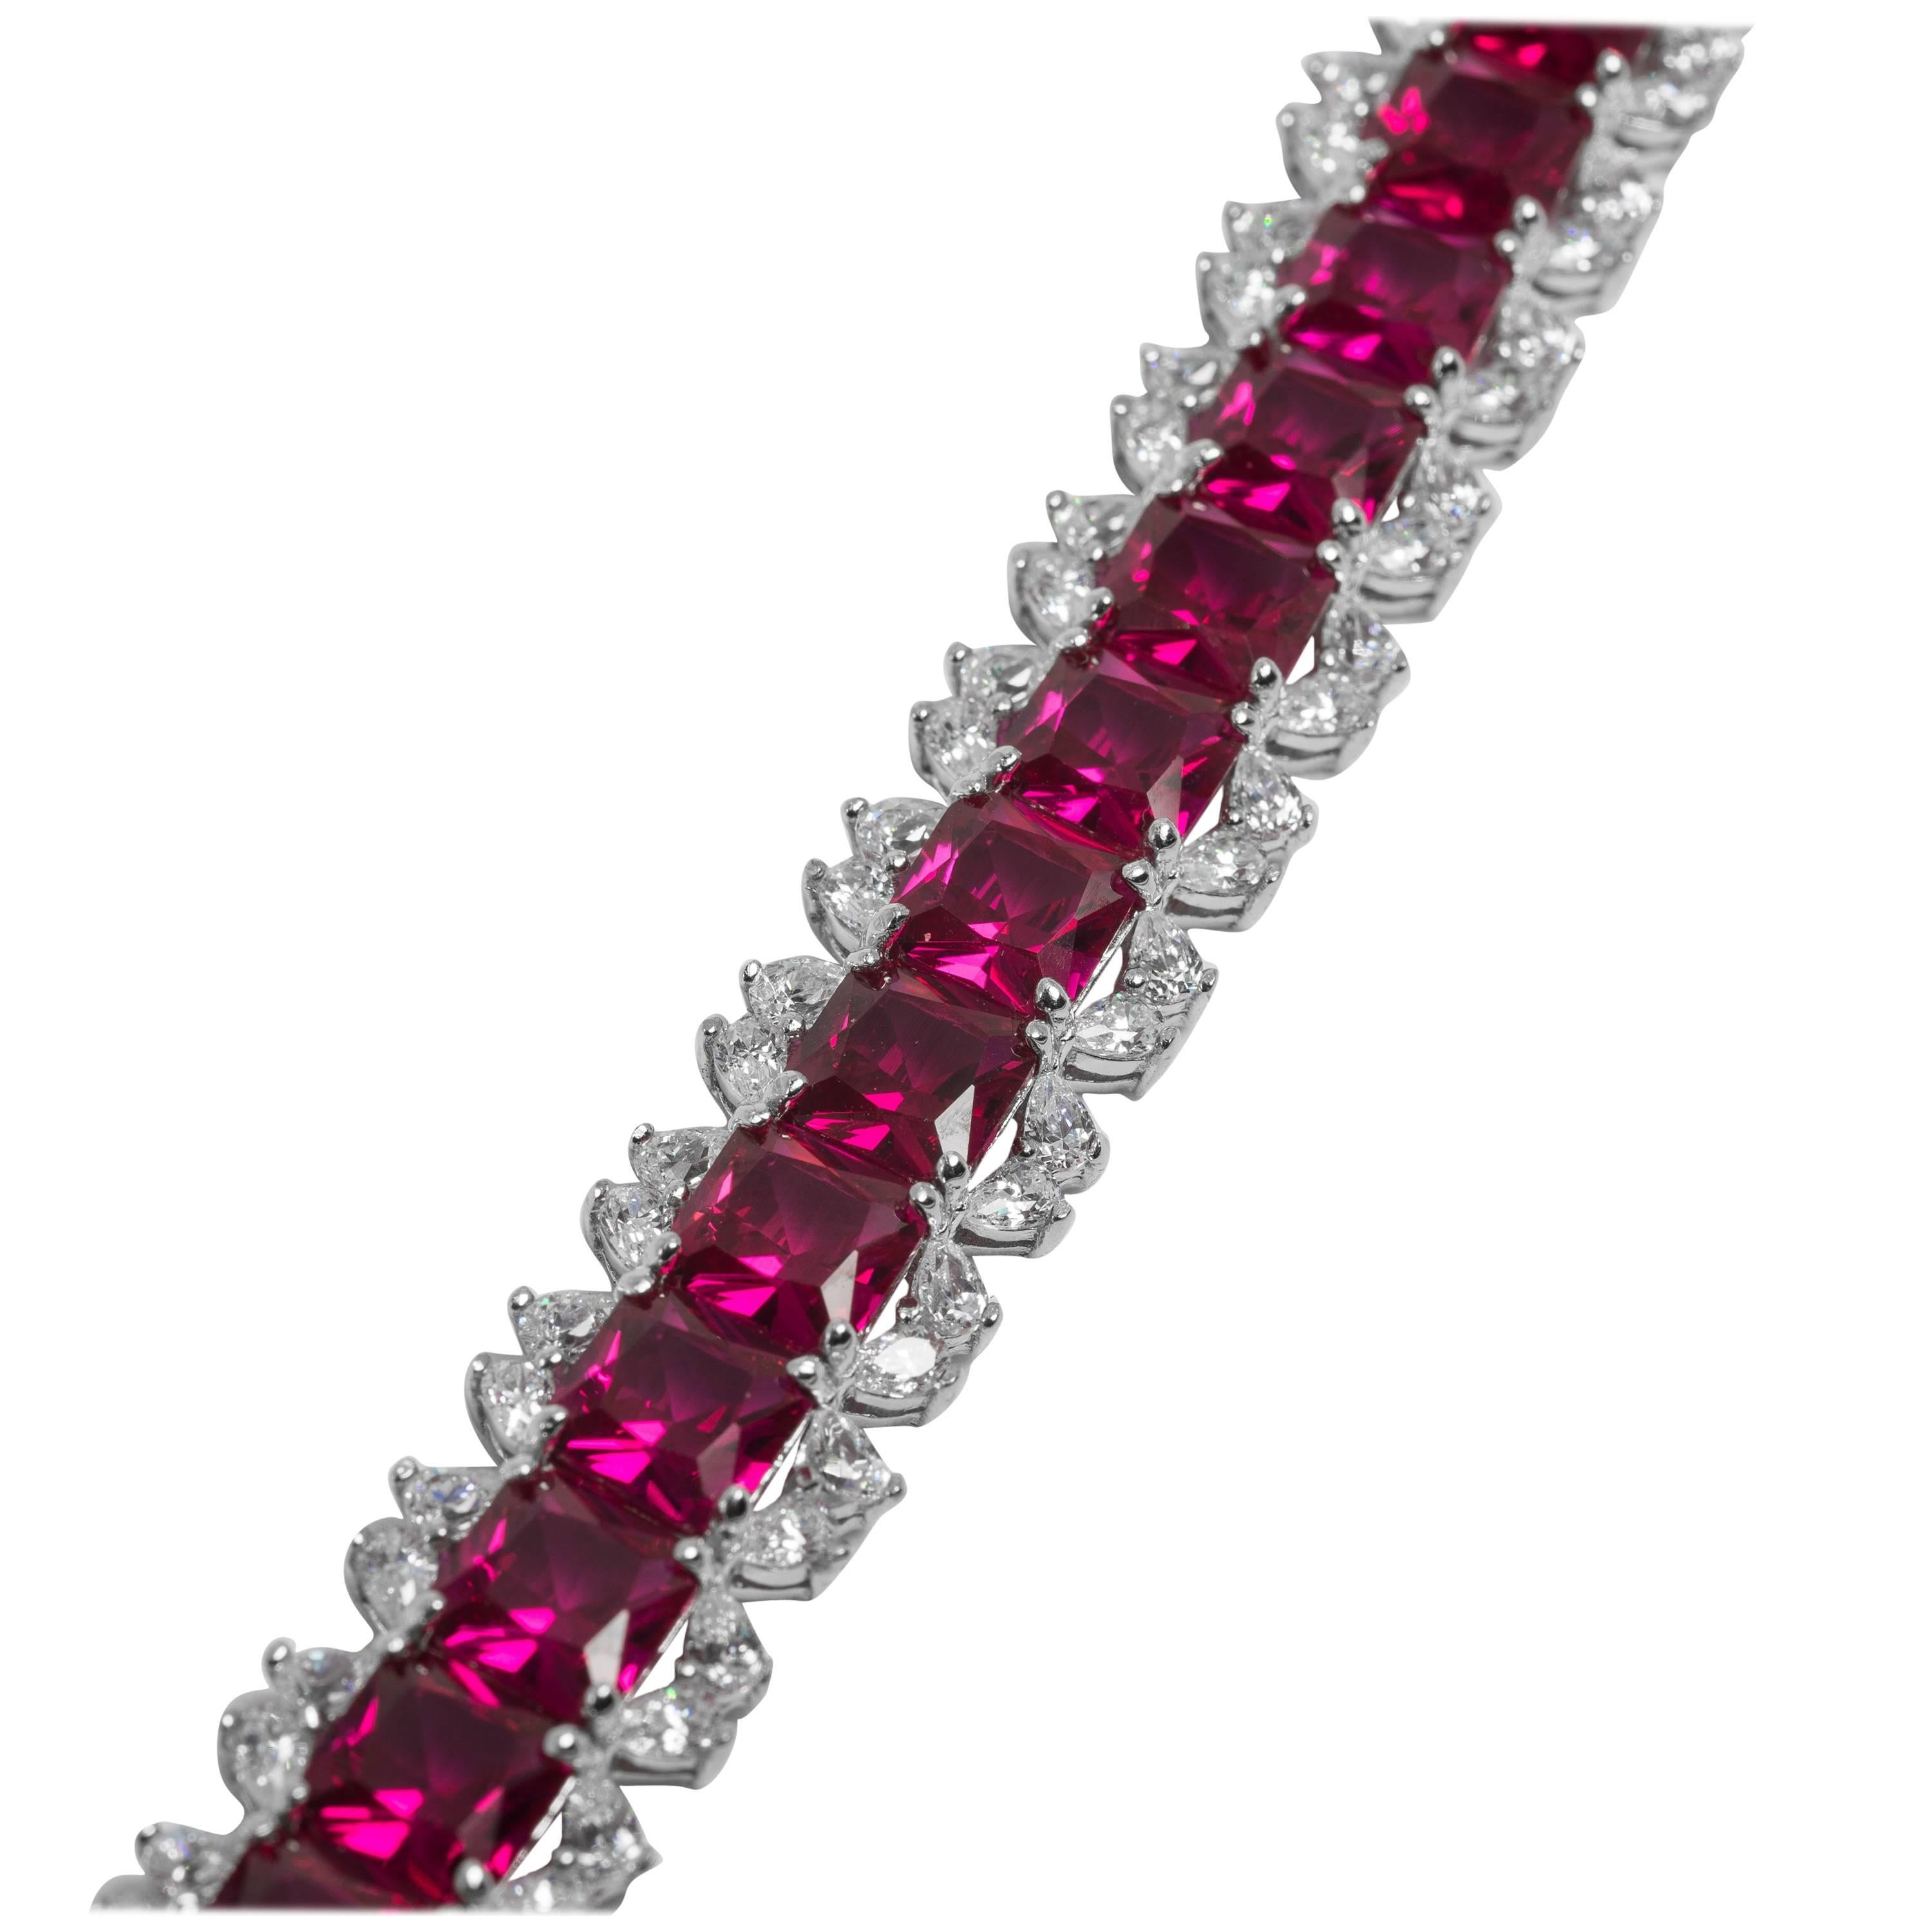 Straight line bracelet of man-made 1 carat Burma rubies edged with cubic zirconia totally flexible secure clasp hand set in rhodium sterling seven inches long by half inch wide.
